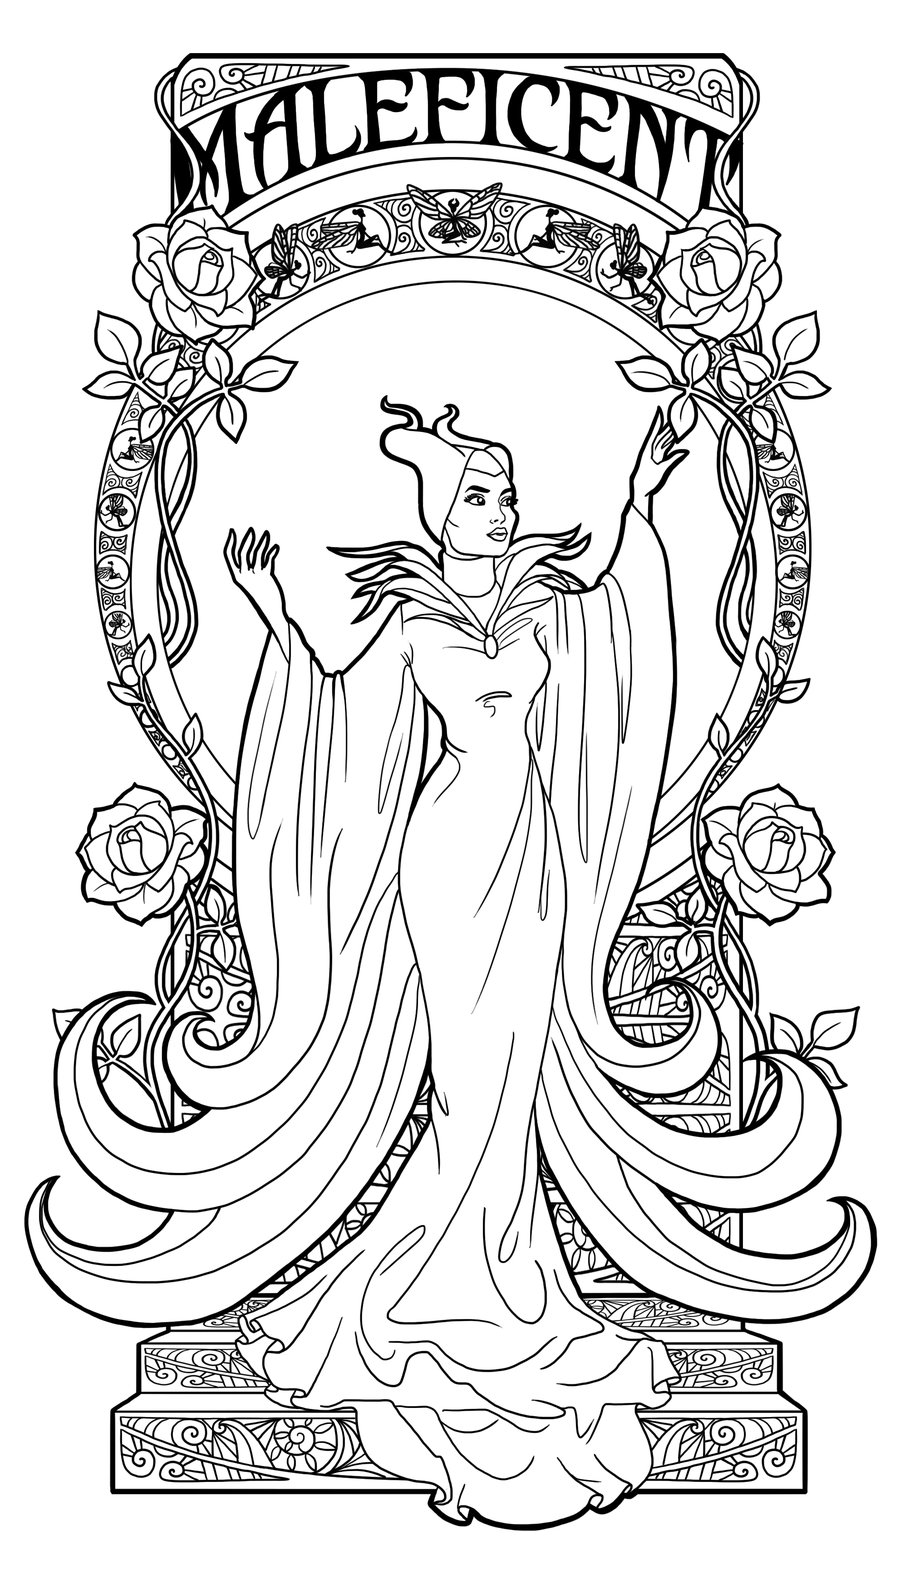 Maleficent Disney Villains Coloring Pages Hard Coloring Disney The Best Porn Website